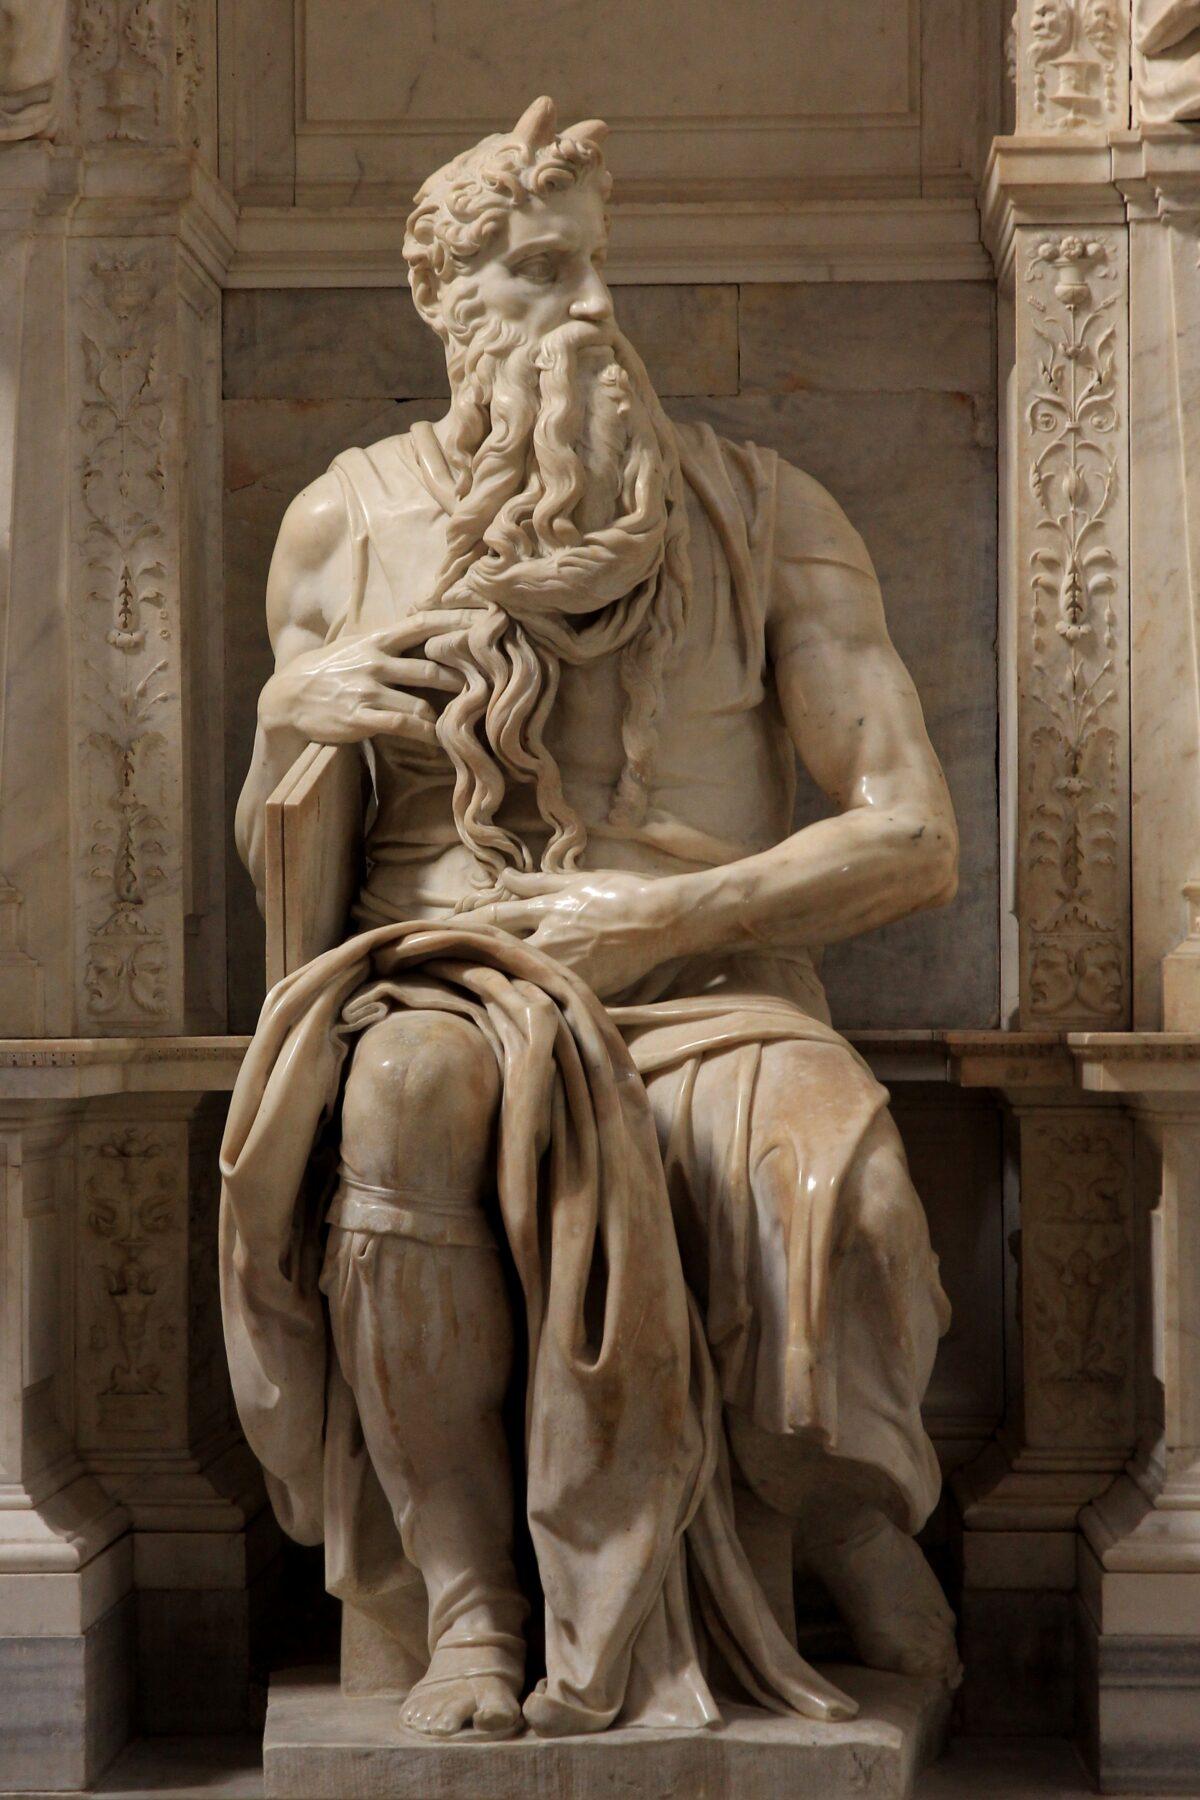 “Moses” by Michelangelo in the church of San Pietro in Vincoli in Rome. (The horns on Moses’s head are attributed to the Latin translation of the Bible at the time of the statue’s creation.) (<a title="User:Jörg Bittner Unna" href="https://commons.wikimedia.org/wiki/User:J%C3%B6rg_Bittner_Unna">Jörg Bittner Unna</a>/<a href="https://creativecommons.org/licenses/by/3.0/us/deed.en">CC BY 3.0</a>)